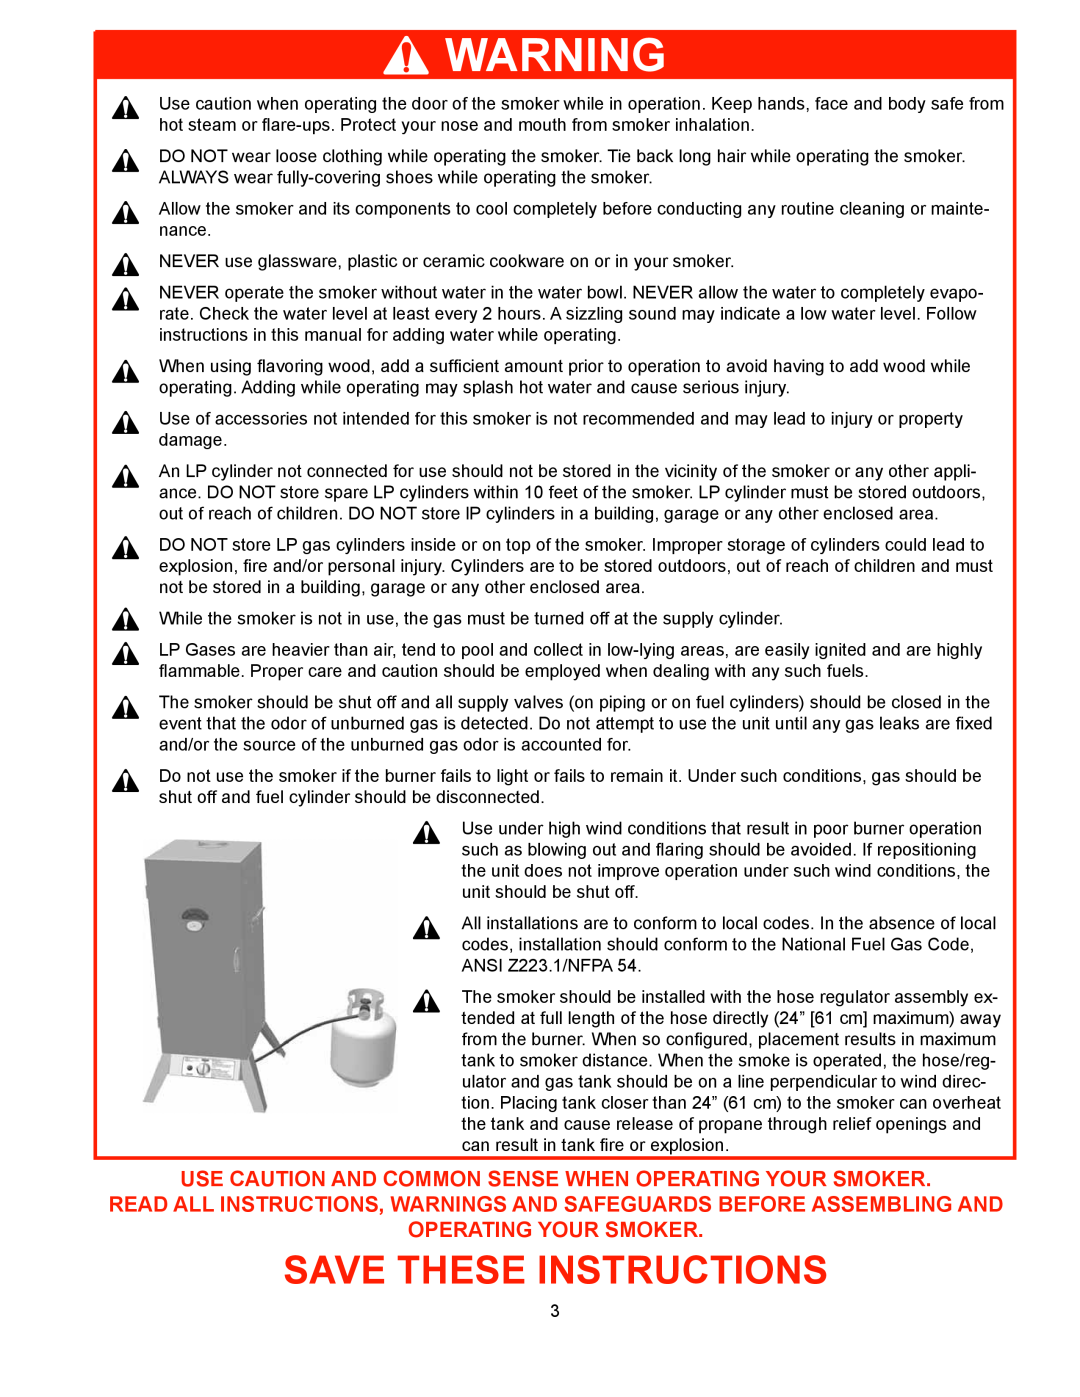 CFM Corporation 3405BG owner manual Save These Instructions, Use Caution And Common Sense When Operating Your Smoker 